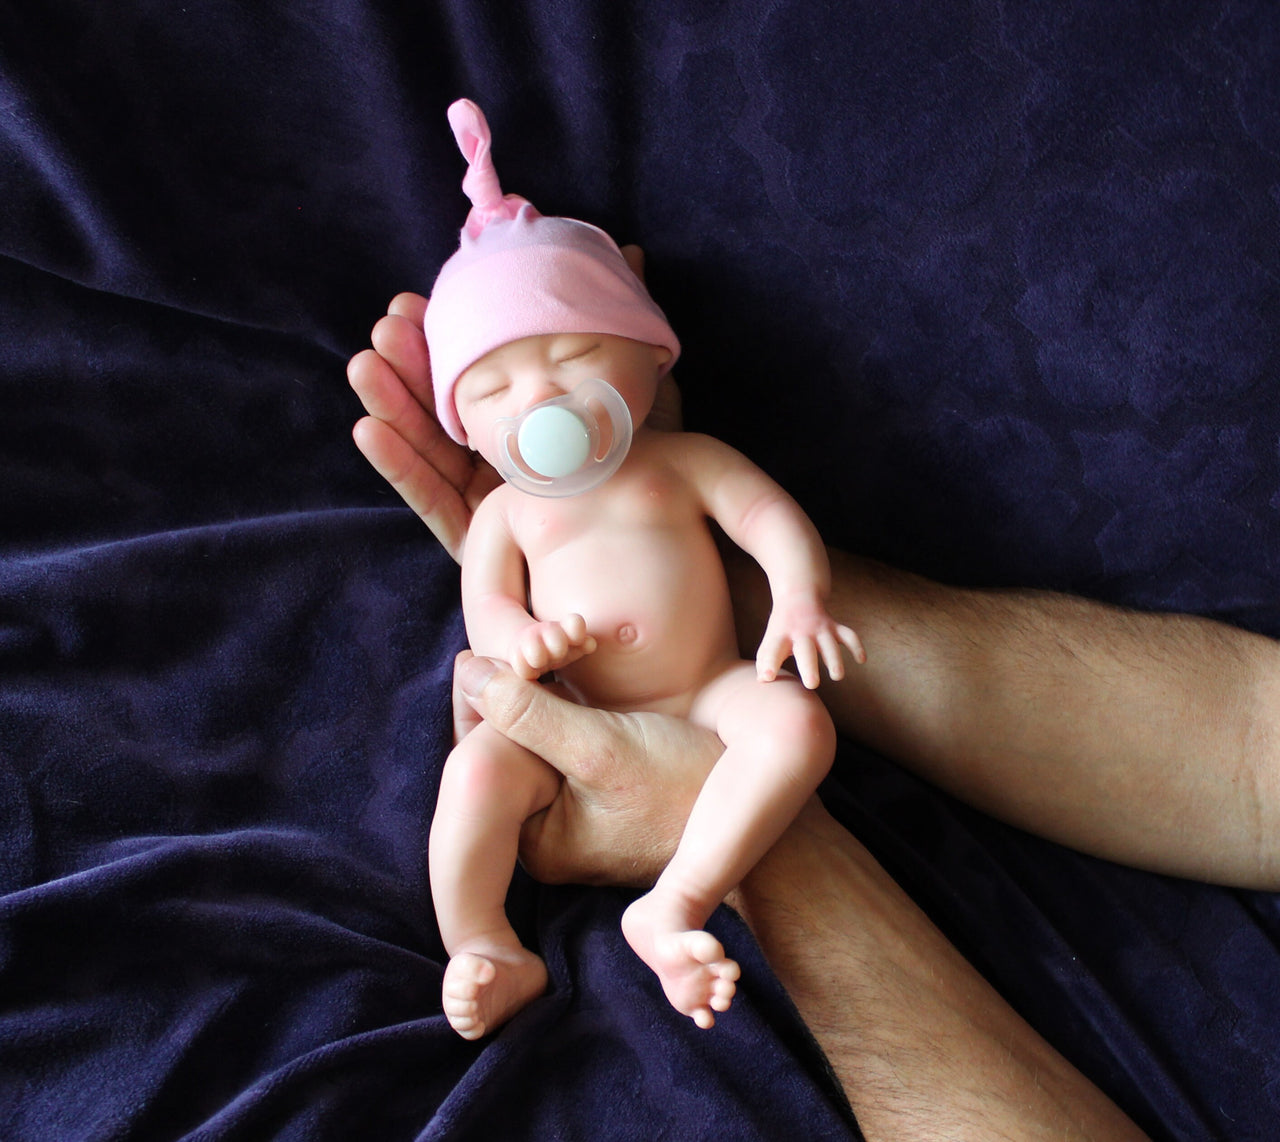 Drink Wet Dolls Full Silicone Wet System Wets Diaper 13" Full Silicone Baby Doll Can Pee Diapers Realistic Real Lifelike 3lbs Dolls Bathtub